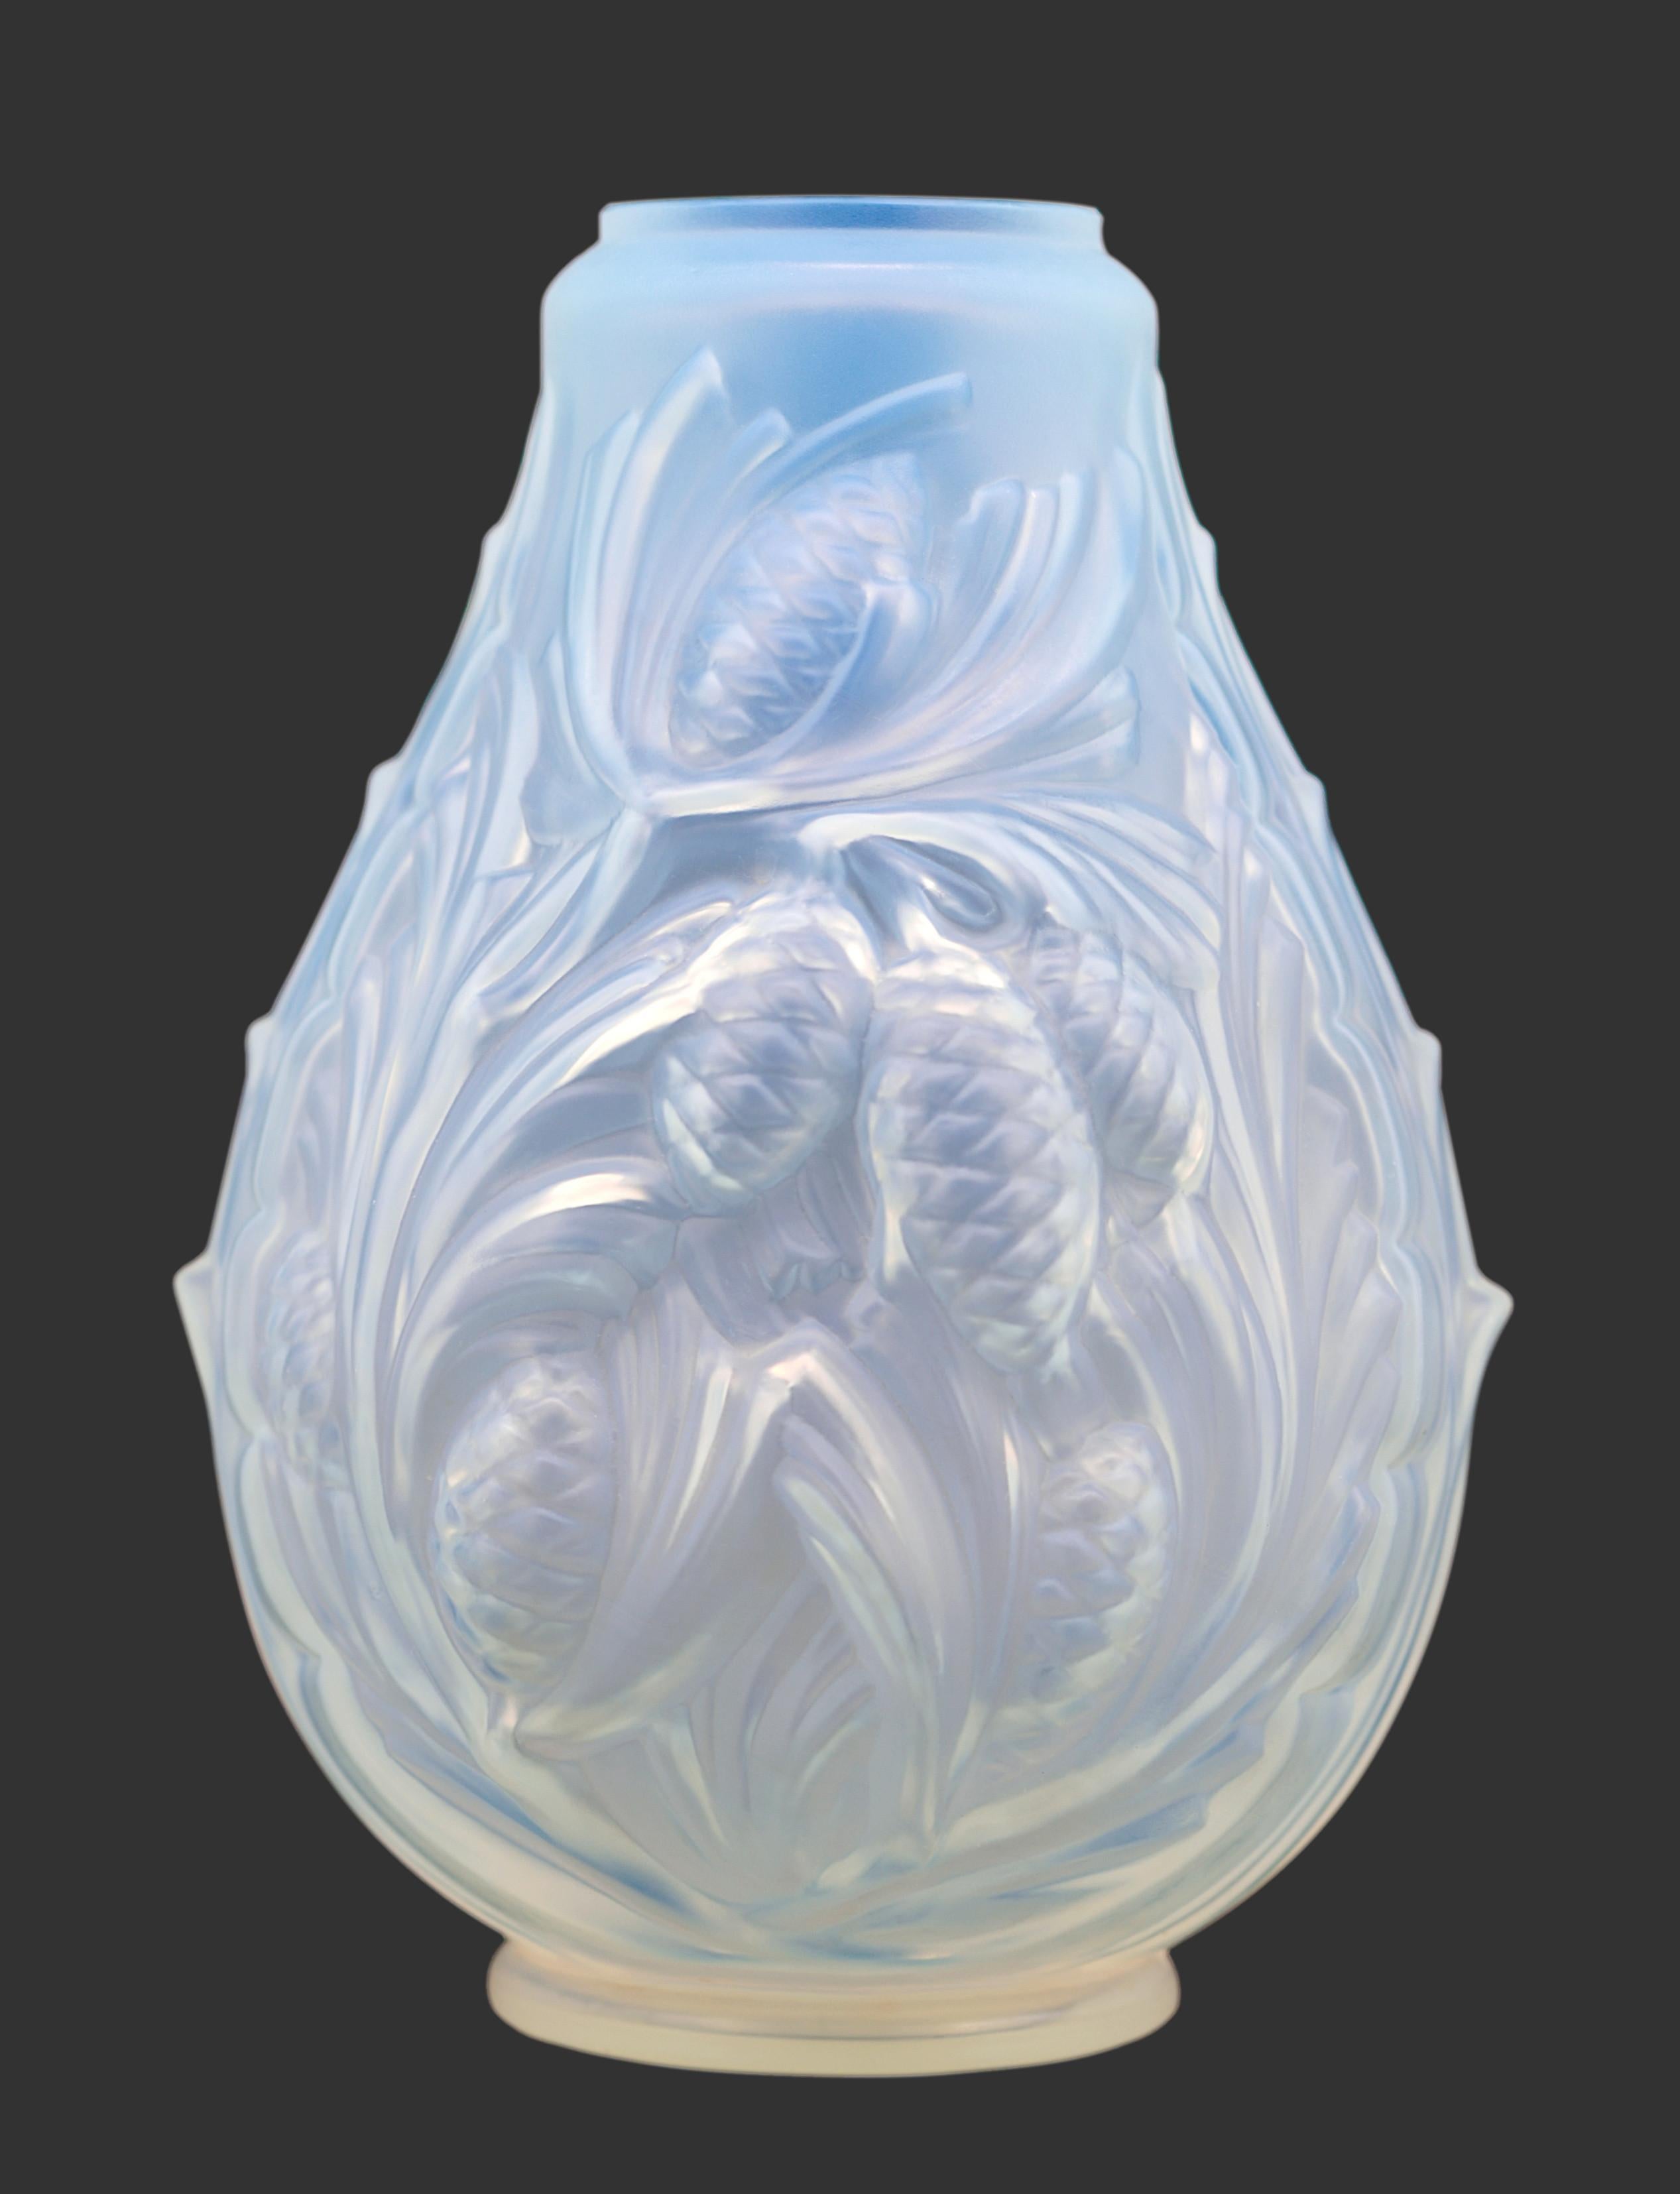 ETLING French Art Deco Frosted Glass Vase, 1930 For Sale 5